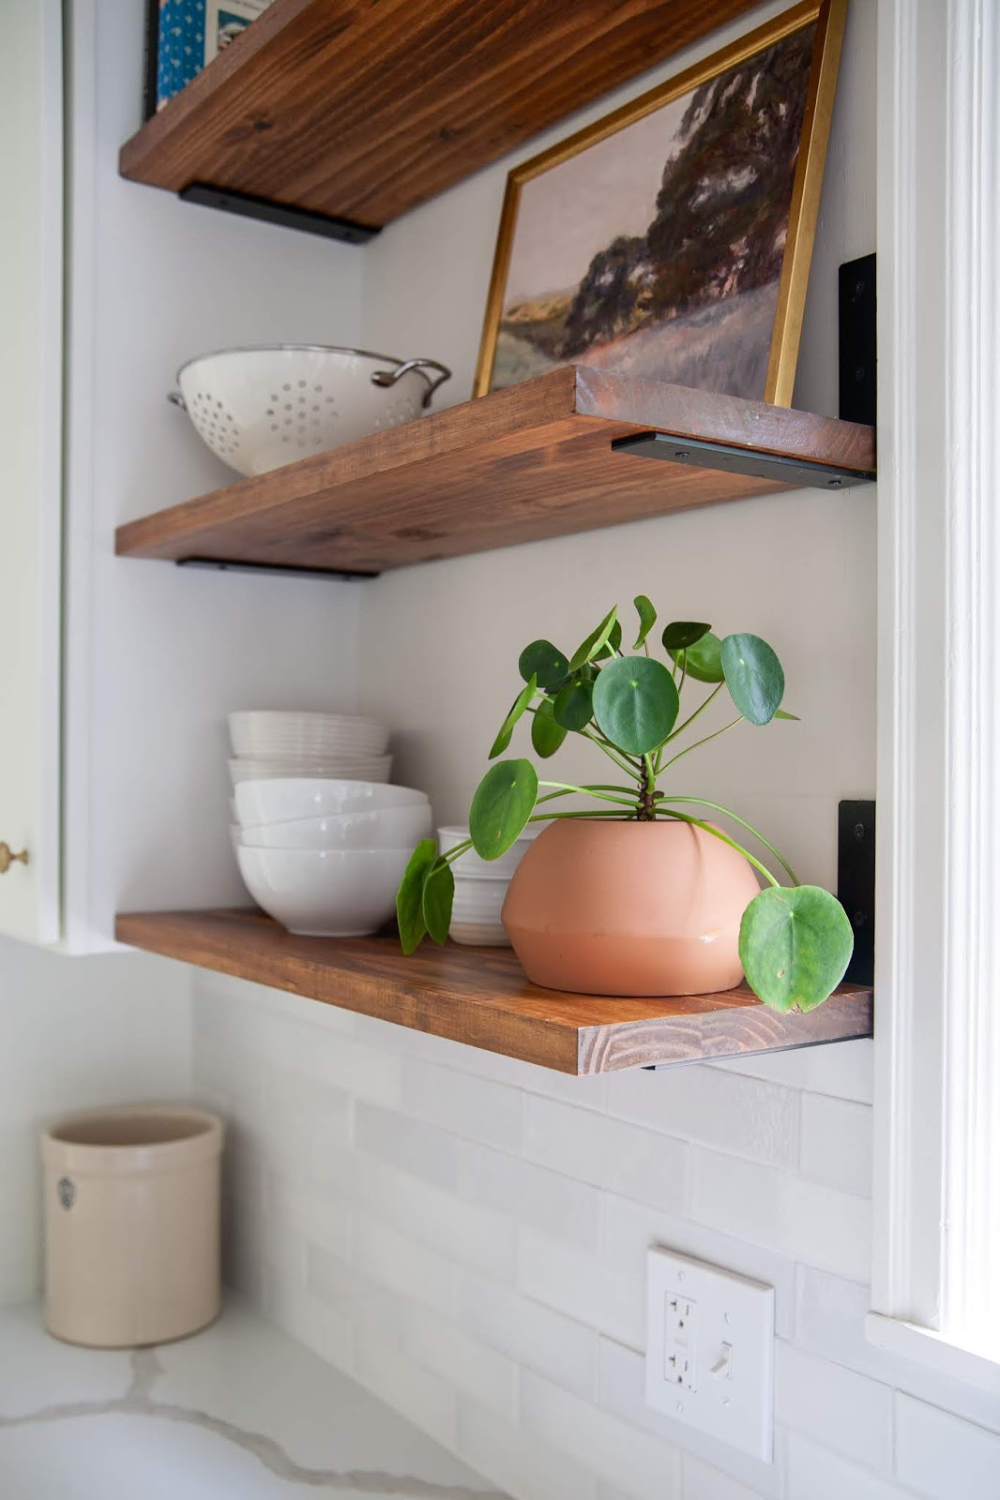 Some interesting and beautiful ideas for
diy shelves